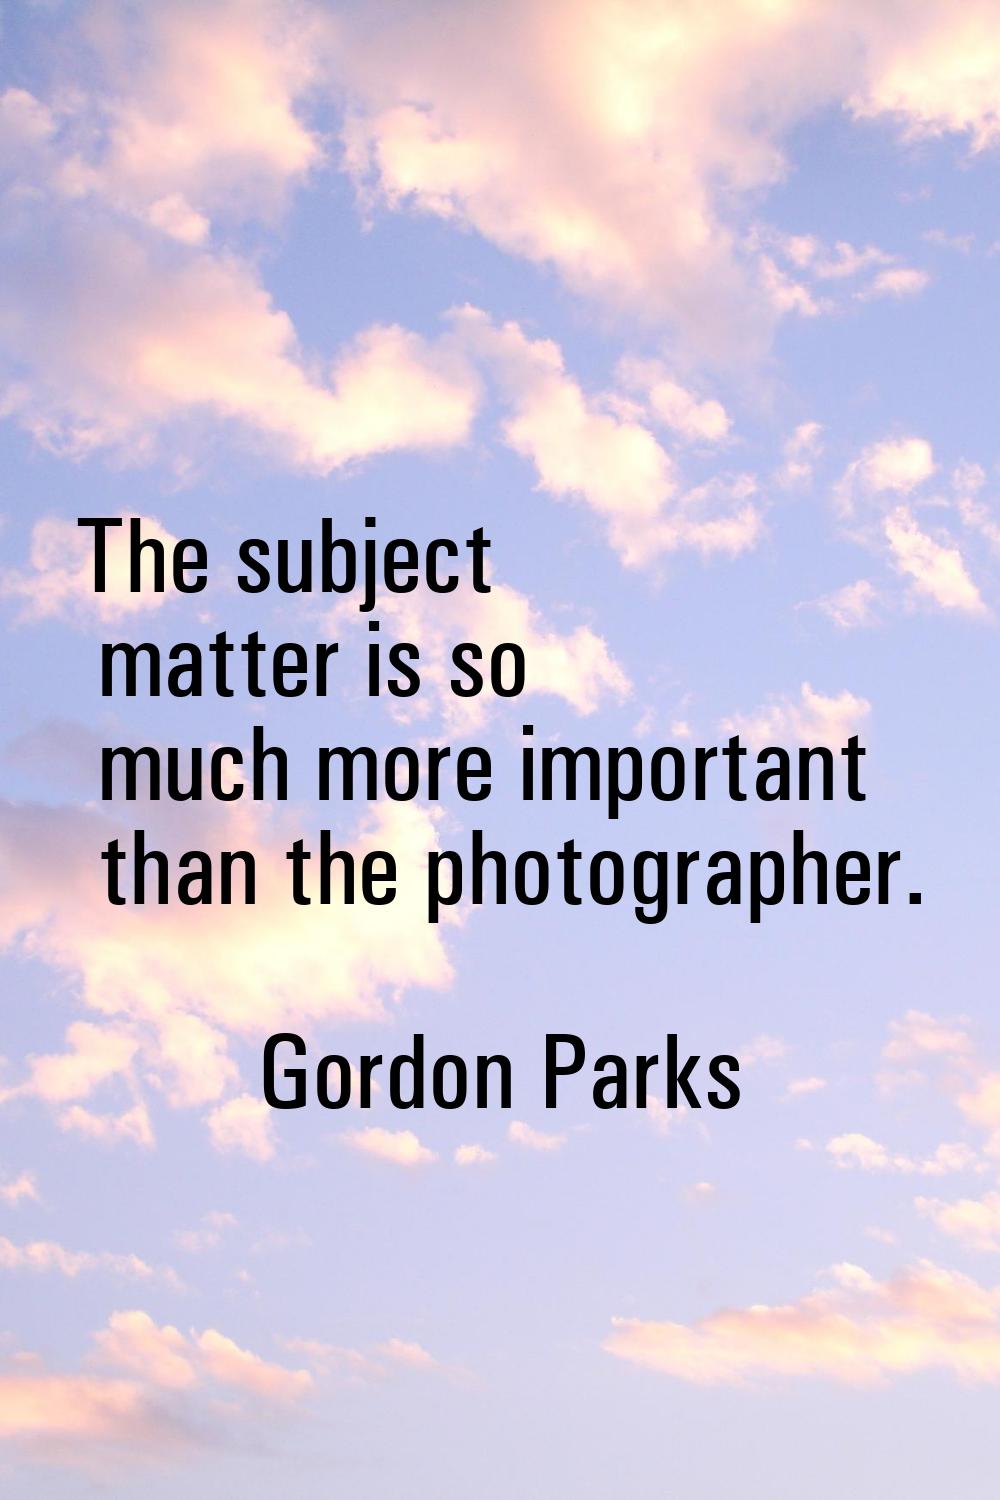 The subject matter is so much more important than the photographer.